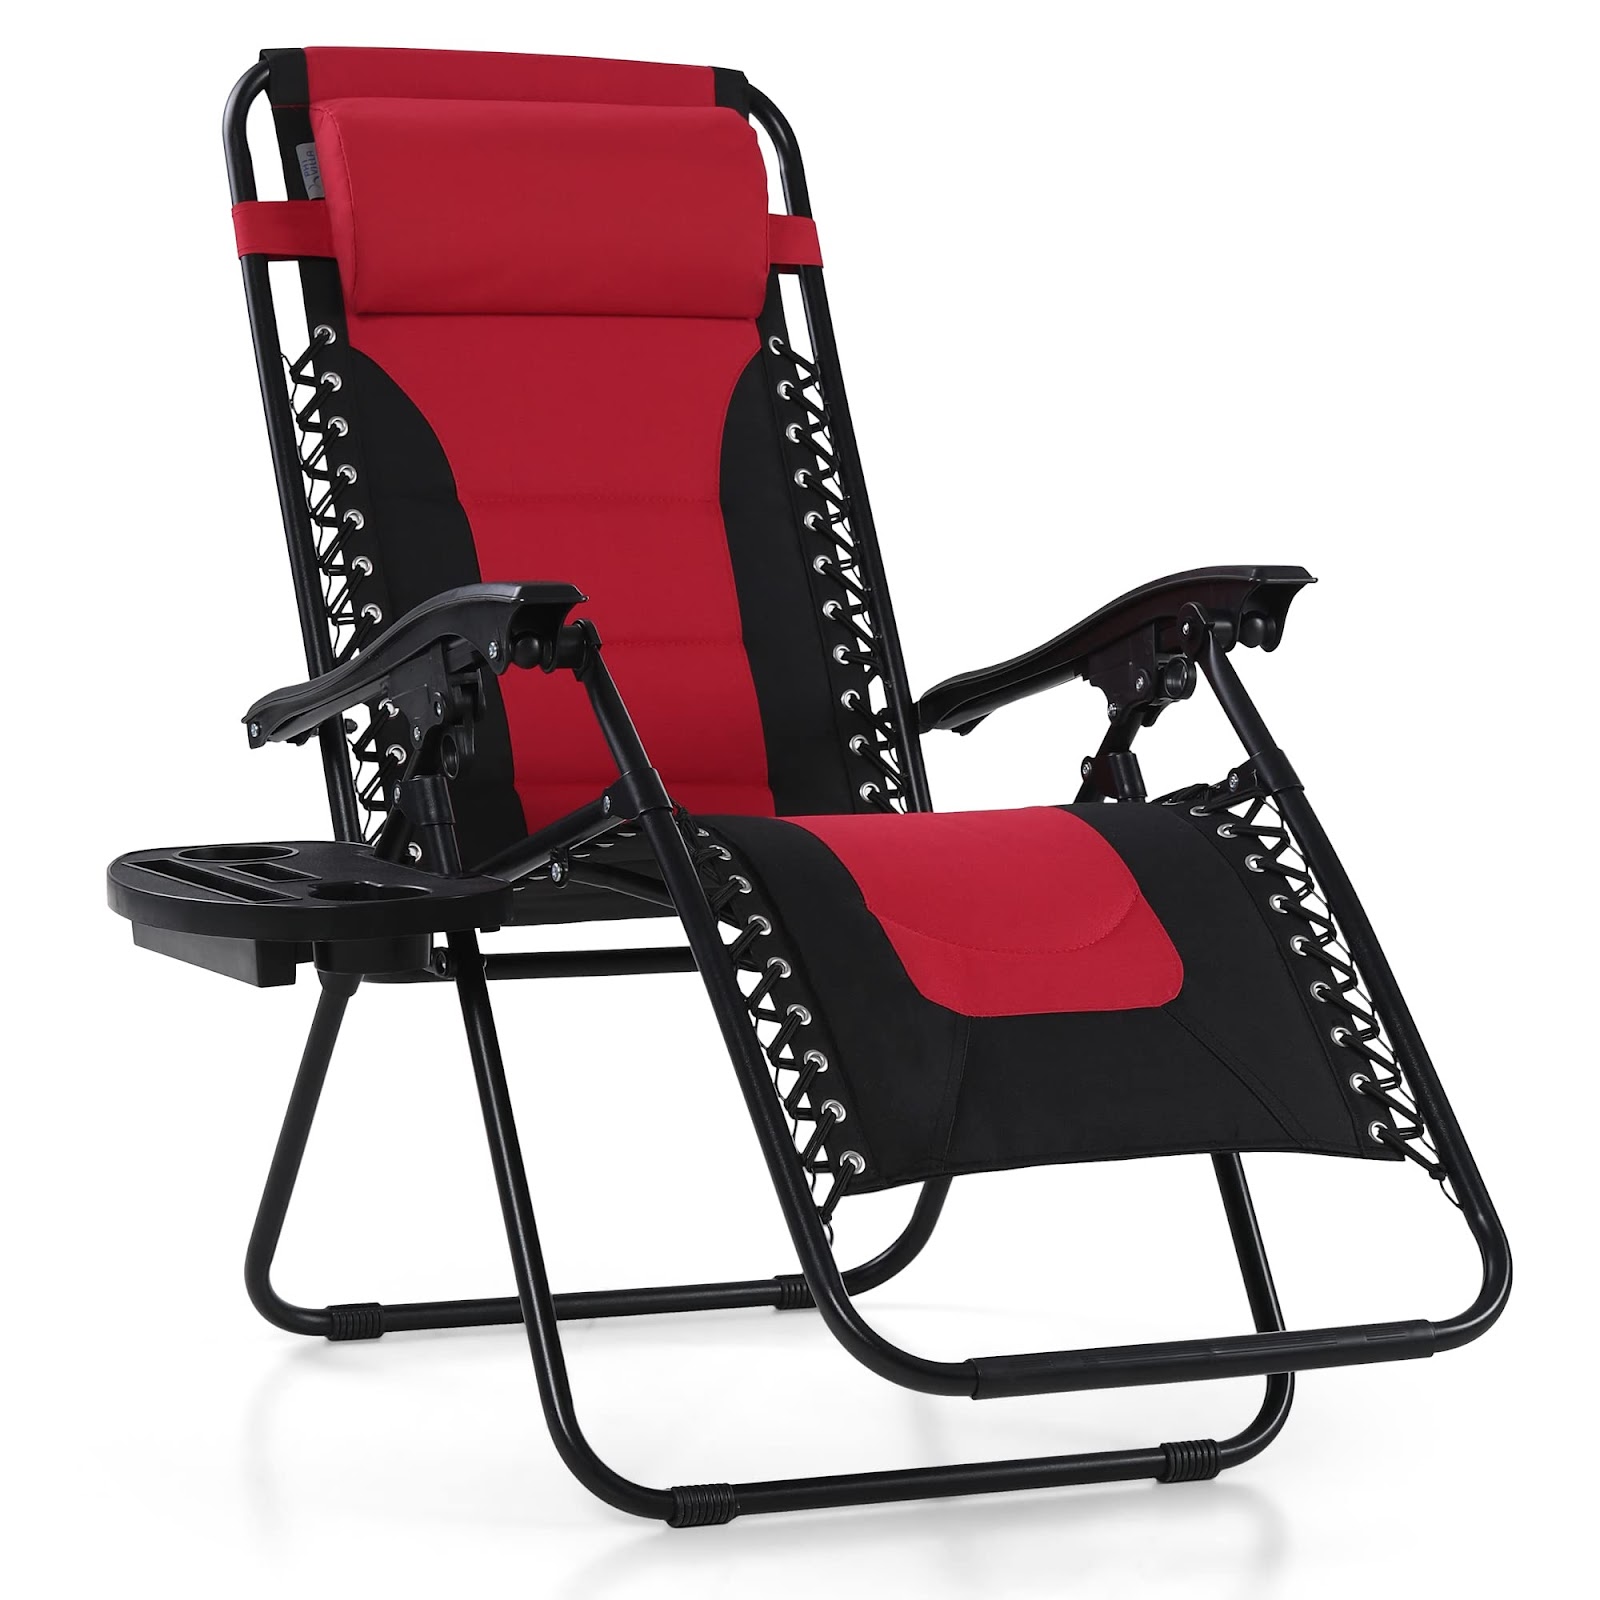 PHI VILLA Oversized Padded Zero Gravity Lounge Chair Folding Patio Recliner with Adjustable Headrest & Cup Holder, Support 350 LBS (Red) Red 1-Pack